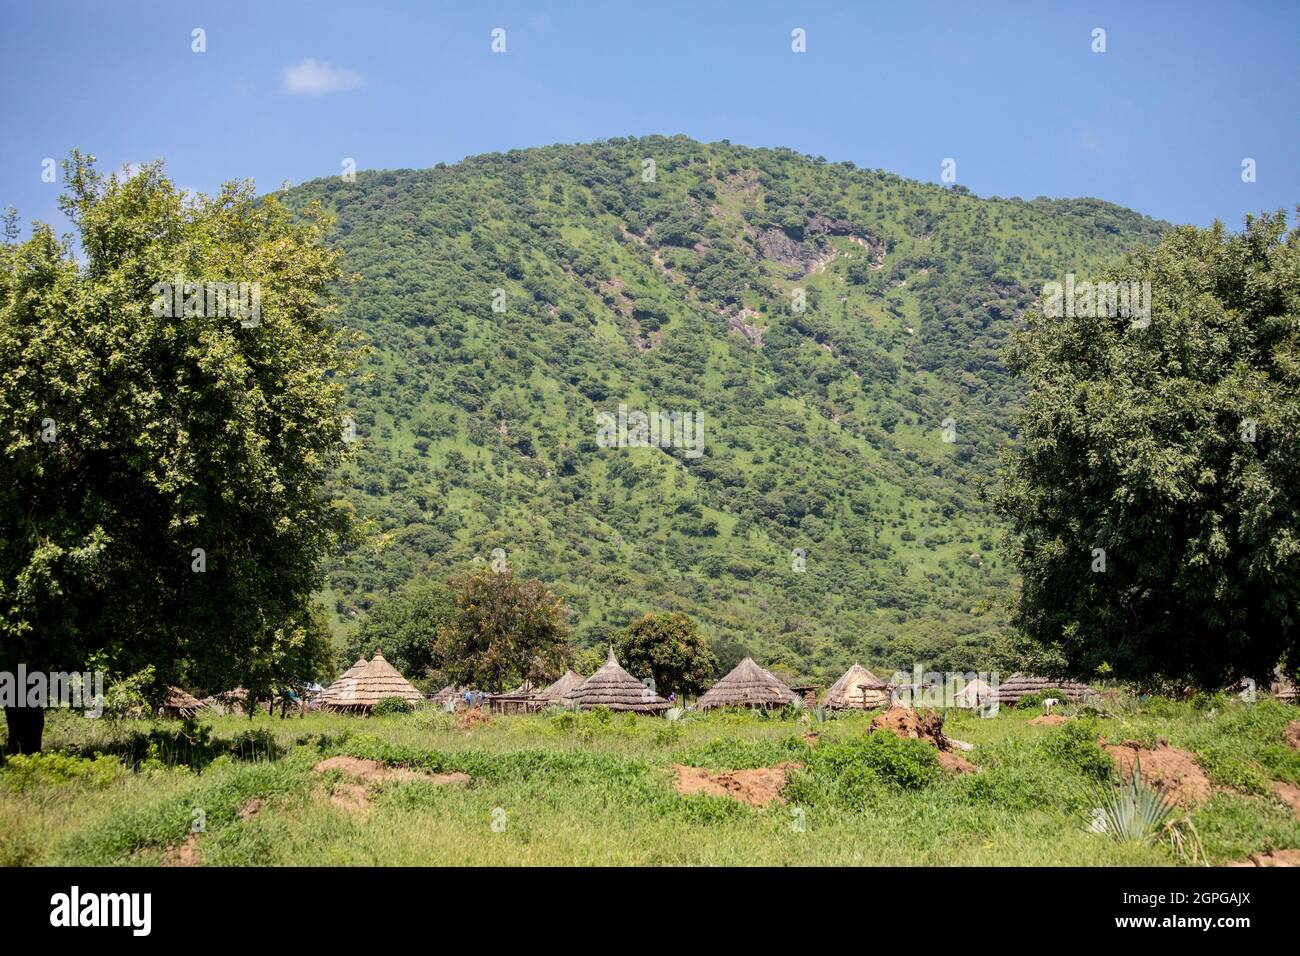 A small village in the Imatong Mountains of South Sudan. Stock Photo